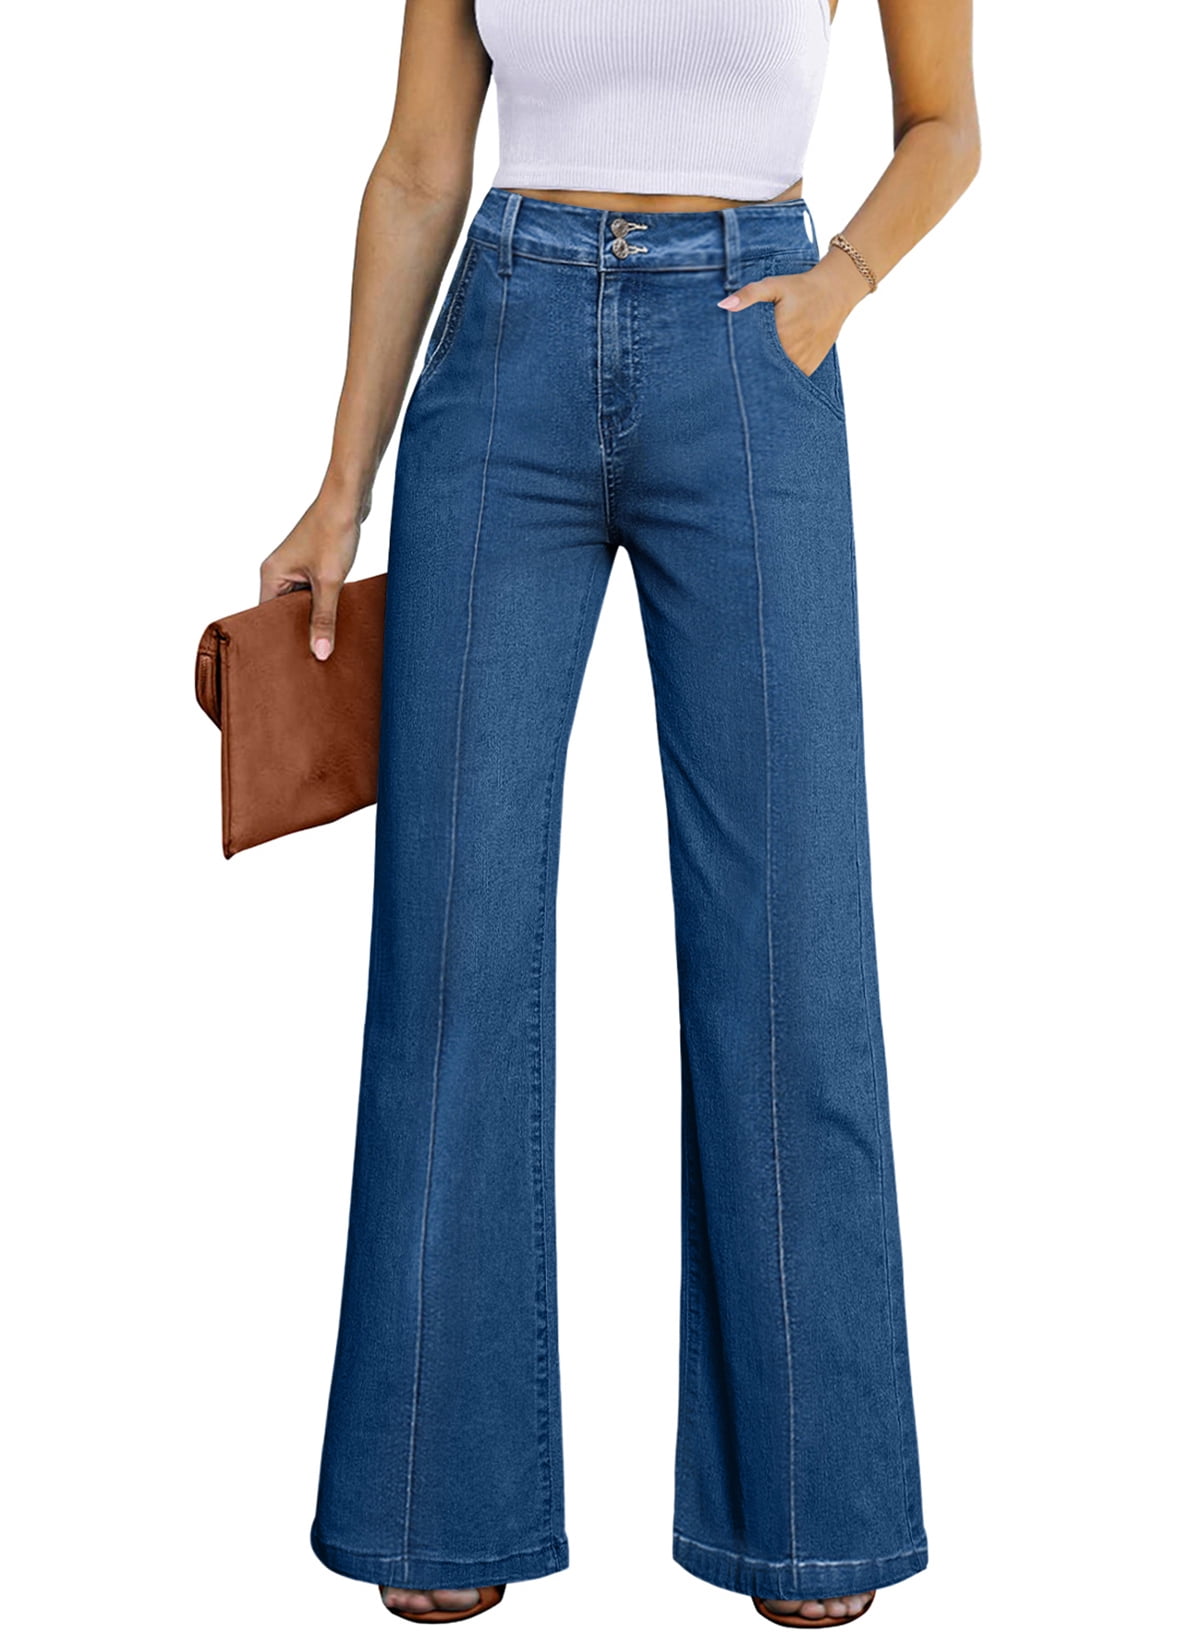 Pull On Womens Jeans Baggy Stretchy High Waisted Denim Wide Leg Trouser ...